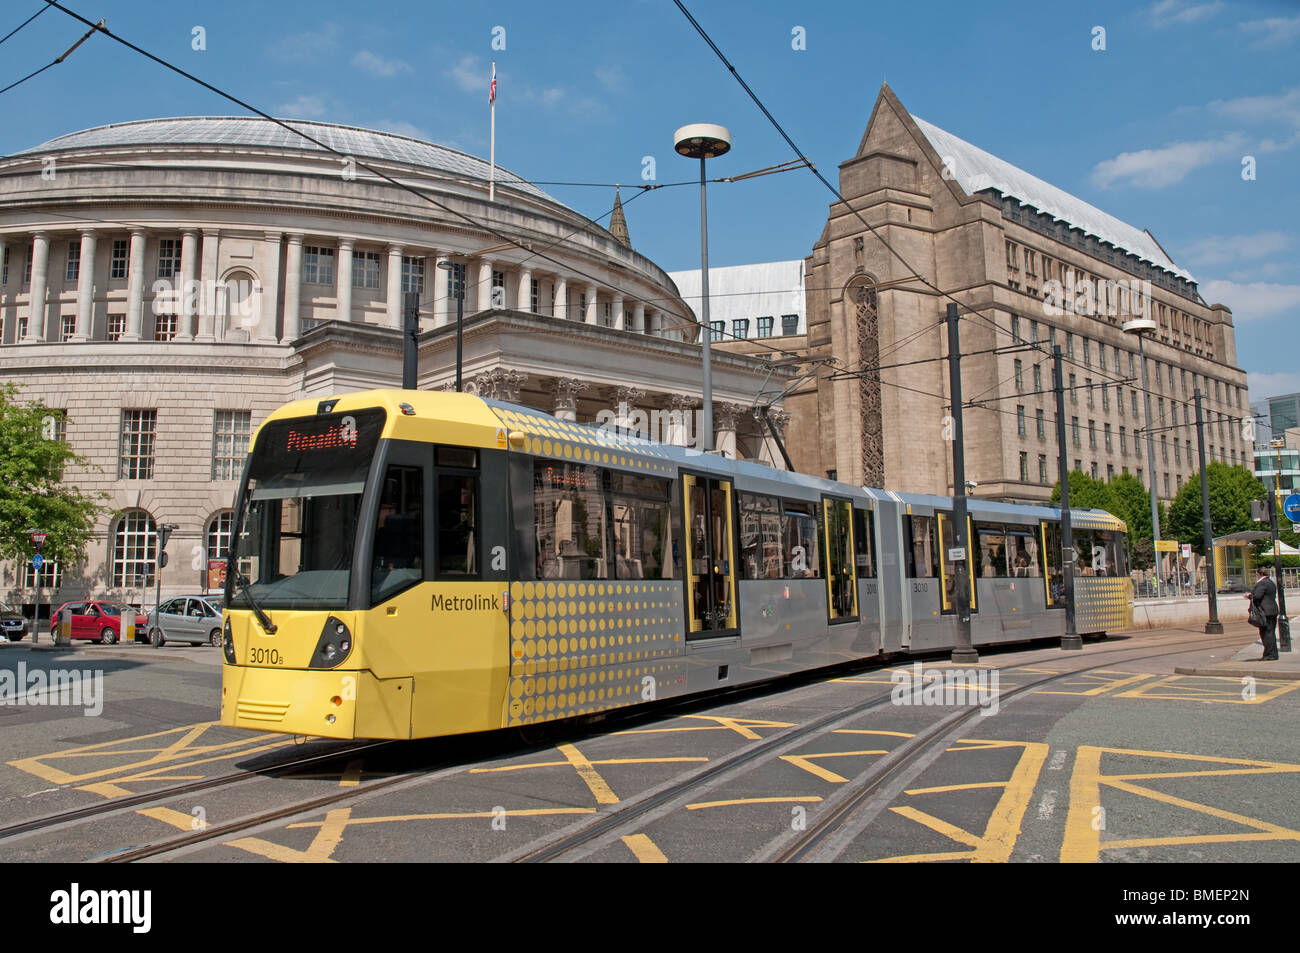 Metrolink tram St Peter's Square,Manchester, with Central Library and the town hall extension in the background. Stock Photo